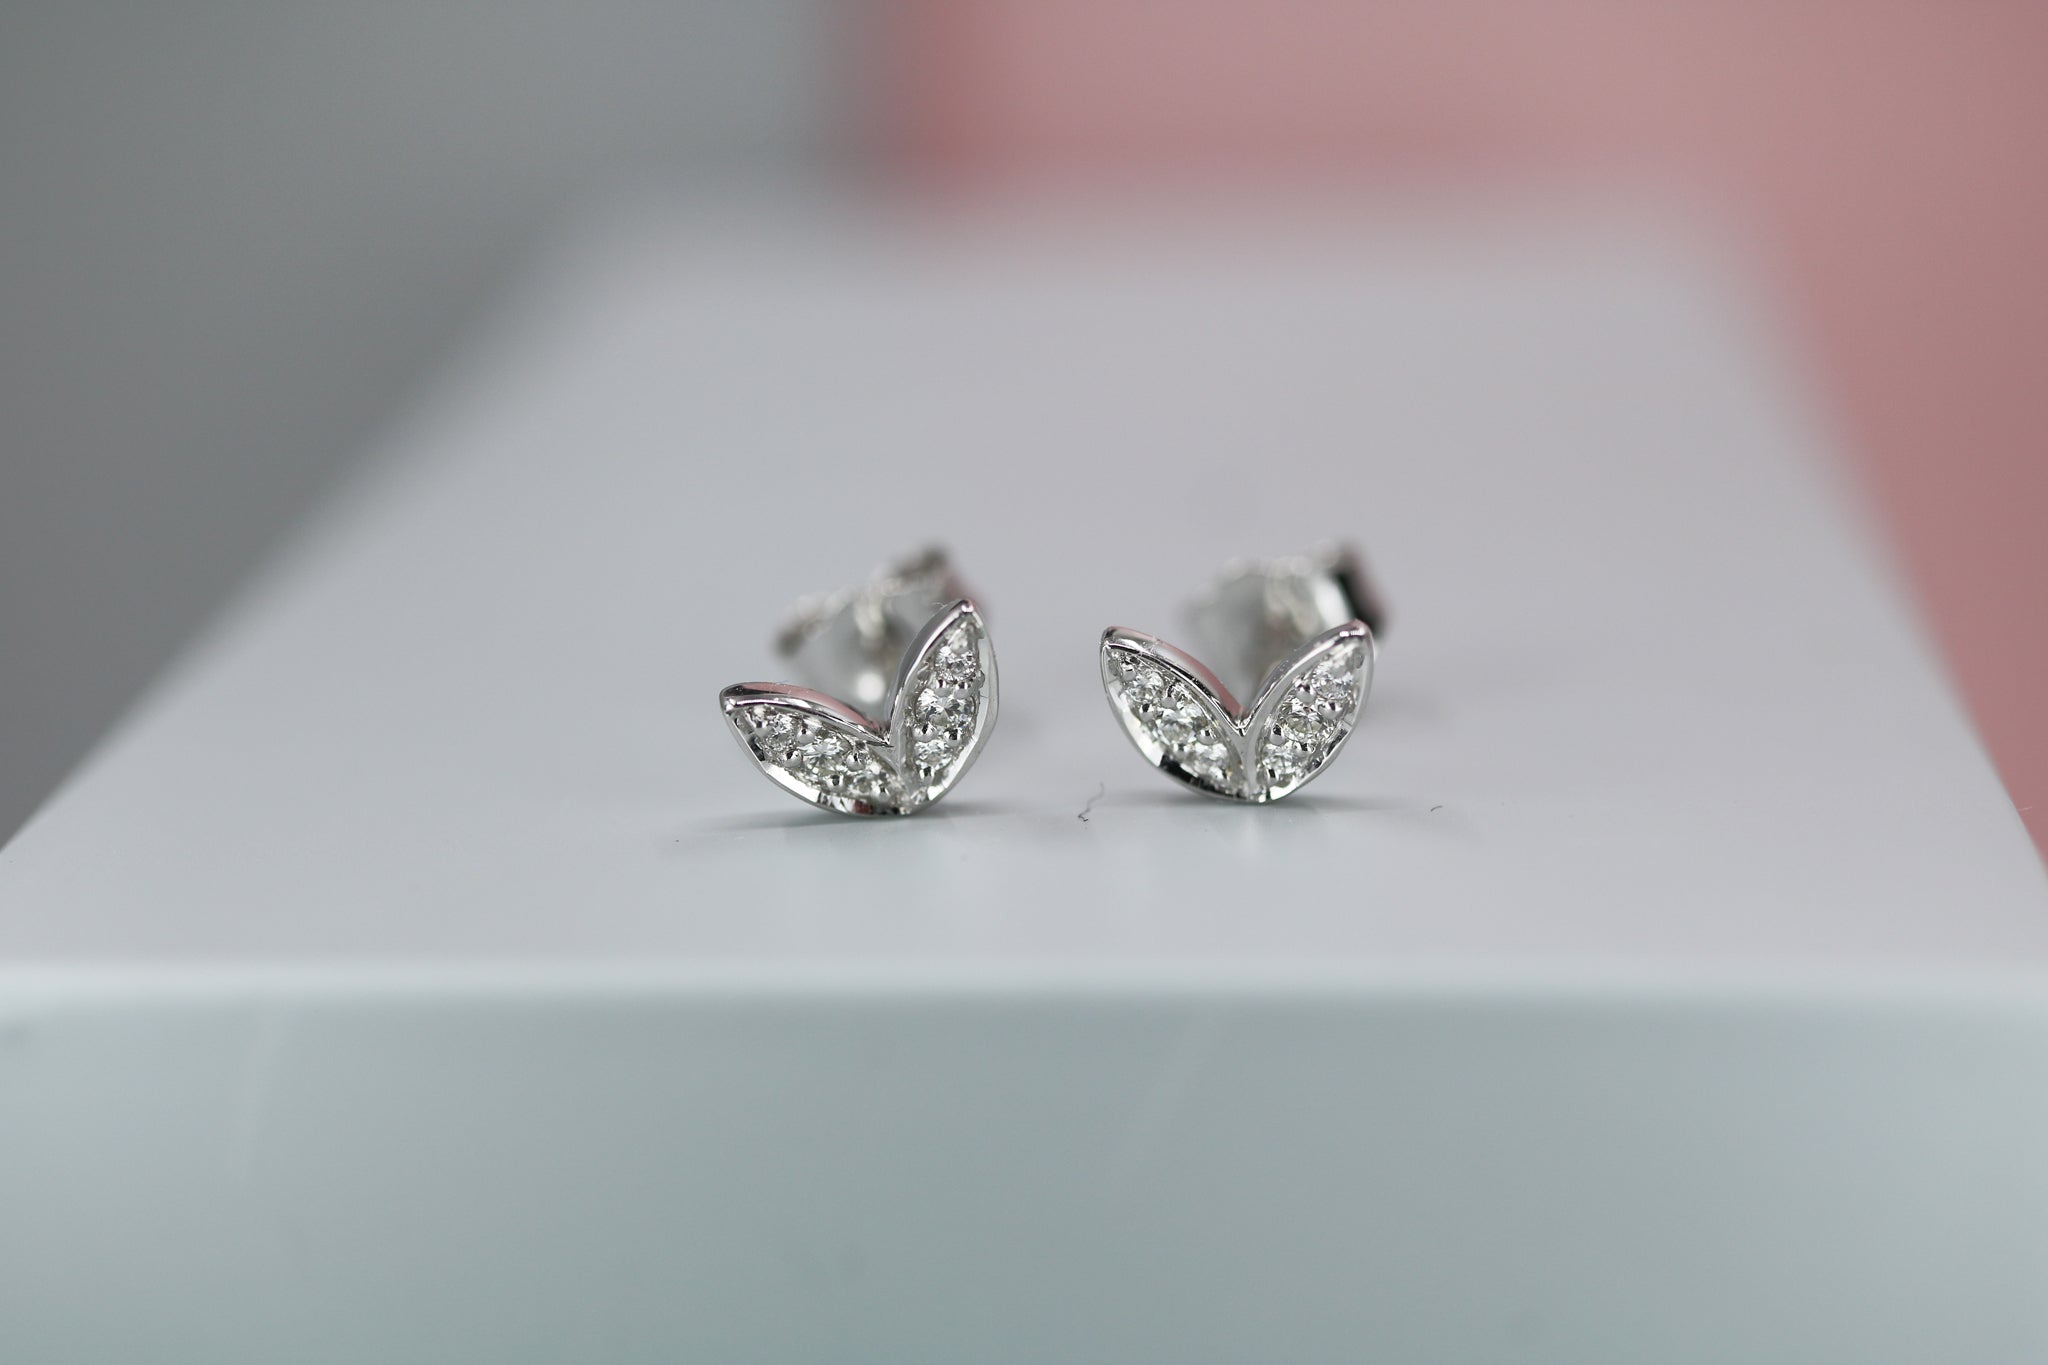 9ct Yellow Gold & Diamond Winged Studs - Hallmark Jewellers Formby & The Jewellers Bench Widnes